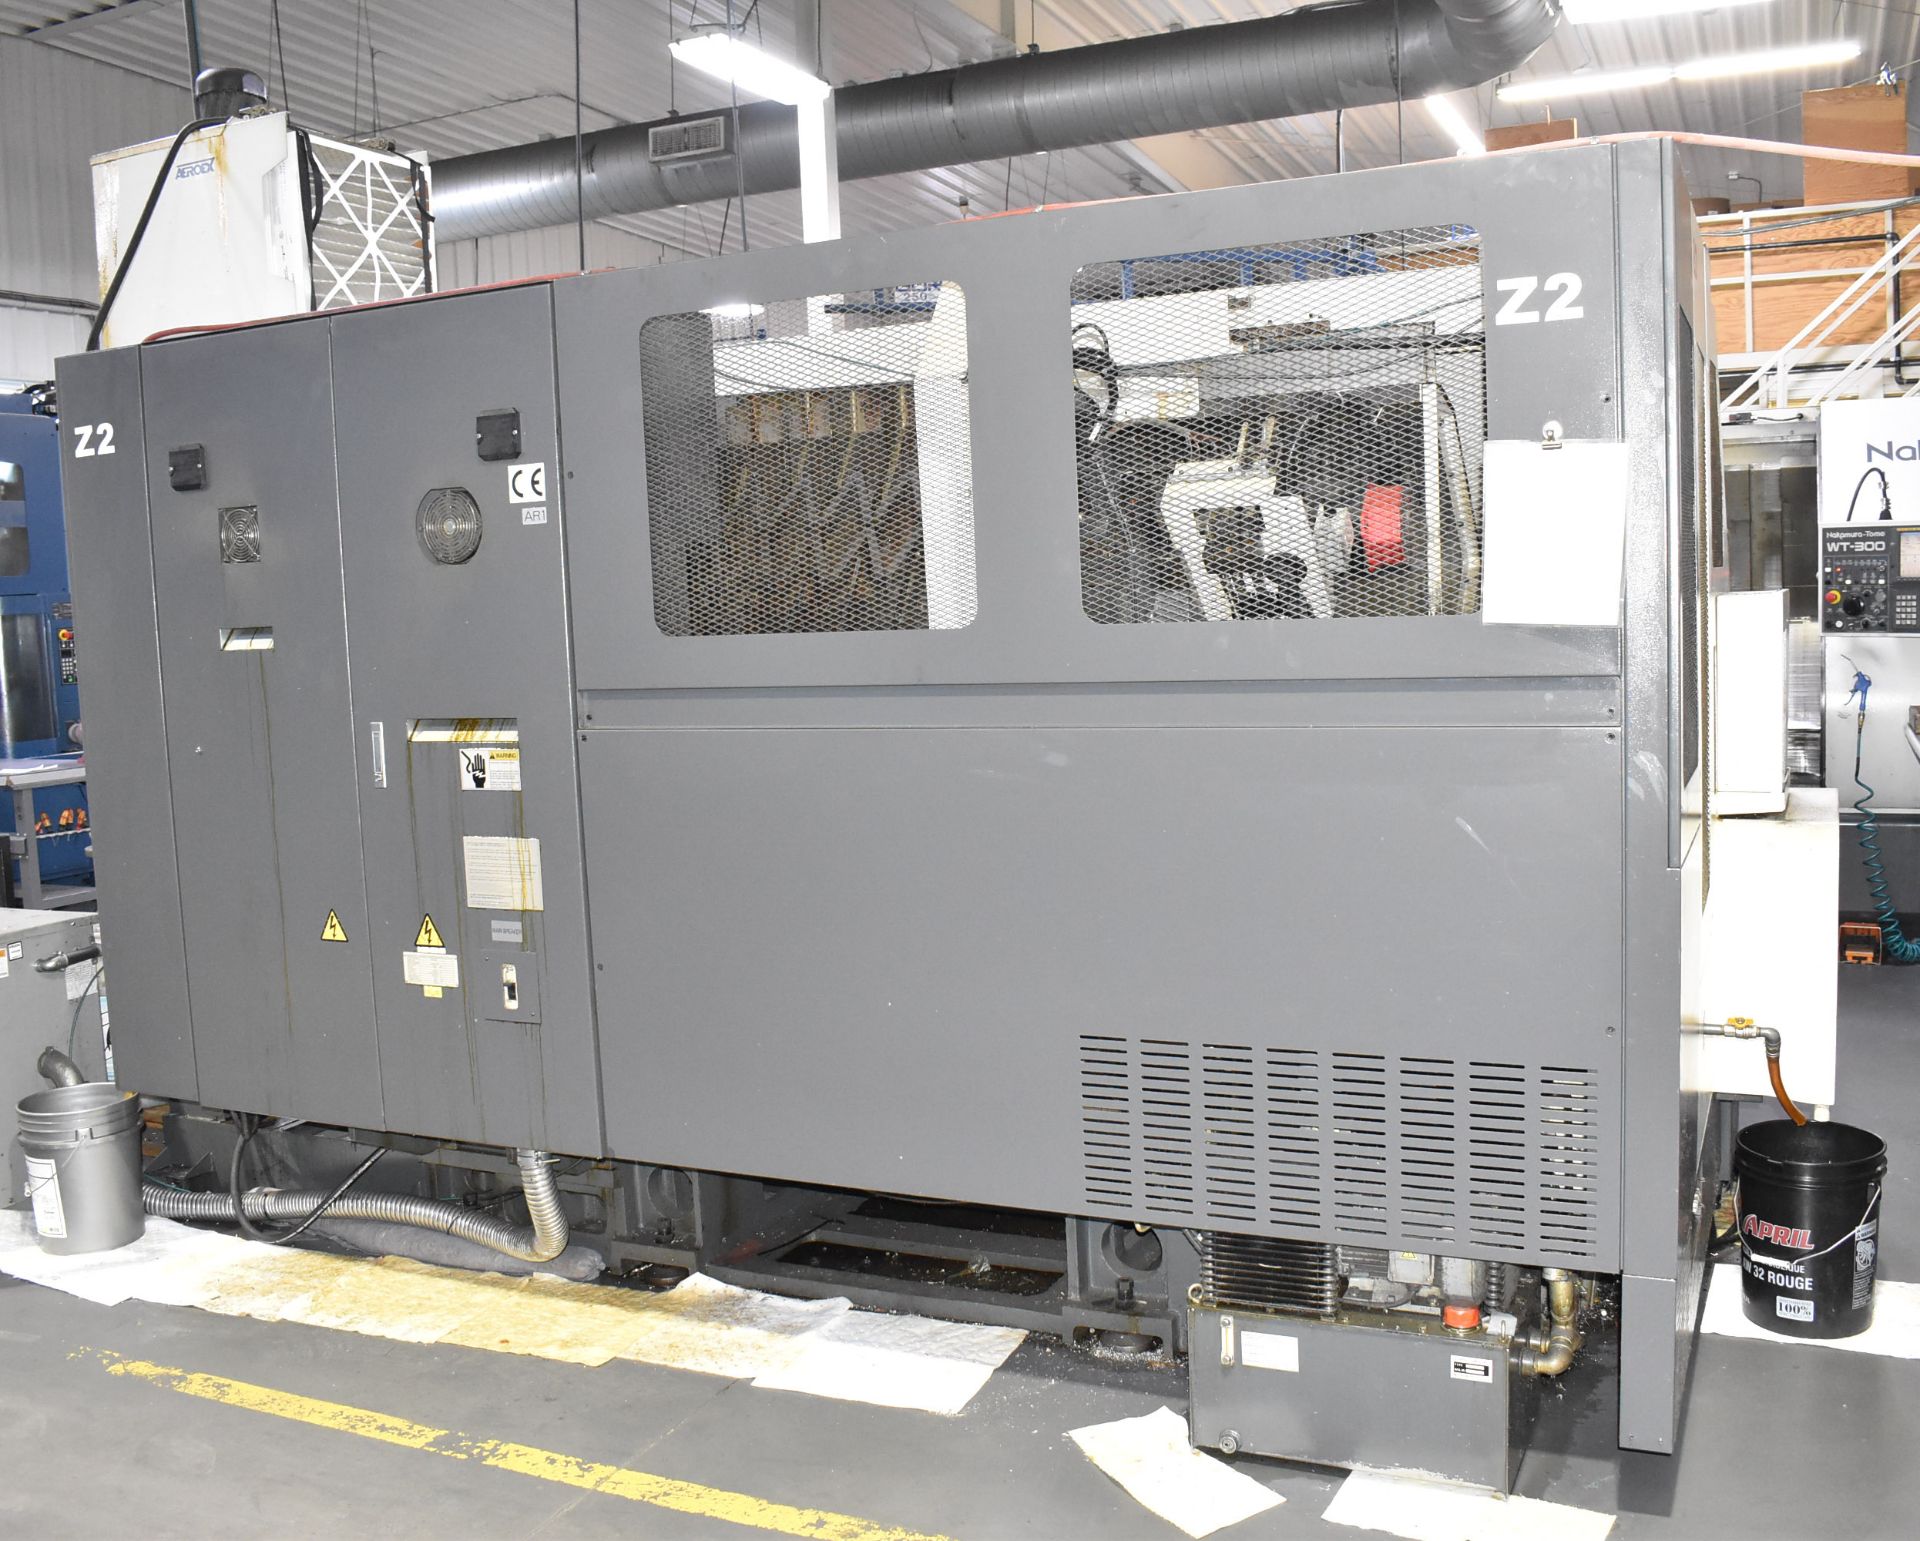 NAKAMURA-TOME (2007) WT-300 MMYS 7-AXIS OPPOSED SPINDLE AND TWIN TURRET CNC MULTI-TASKING CENTER - Image 13 of 15